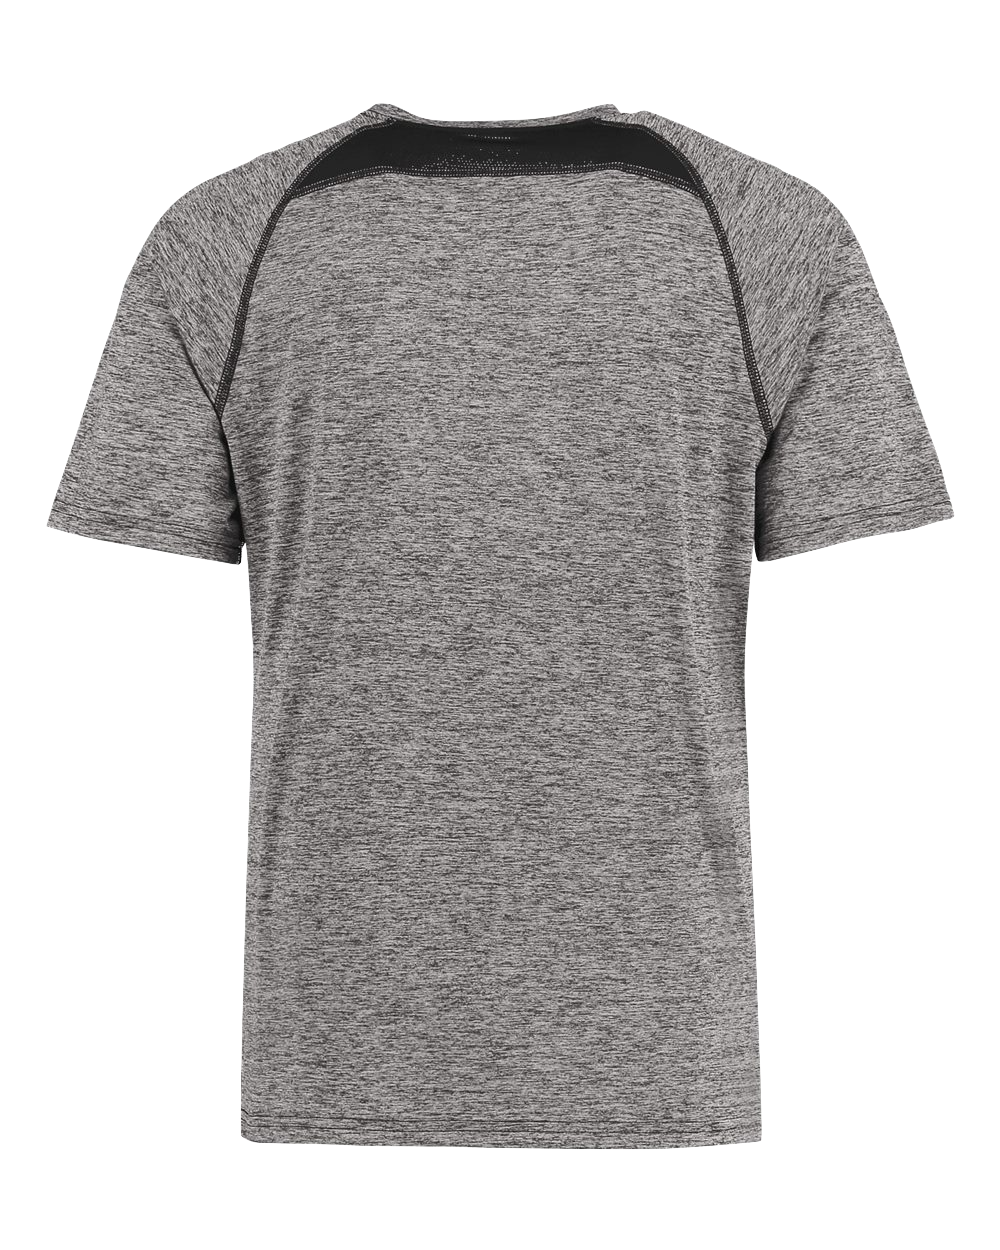 BE PRESENT MOUNTAIN Poly/Elastane High Performance T-Shirt with UPF 50+